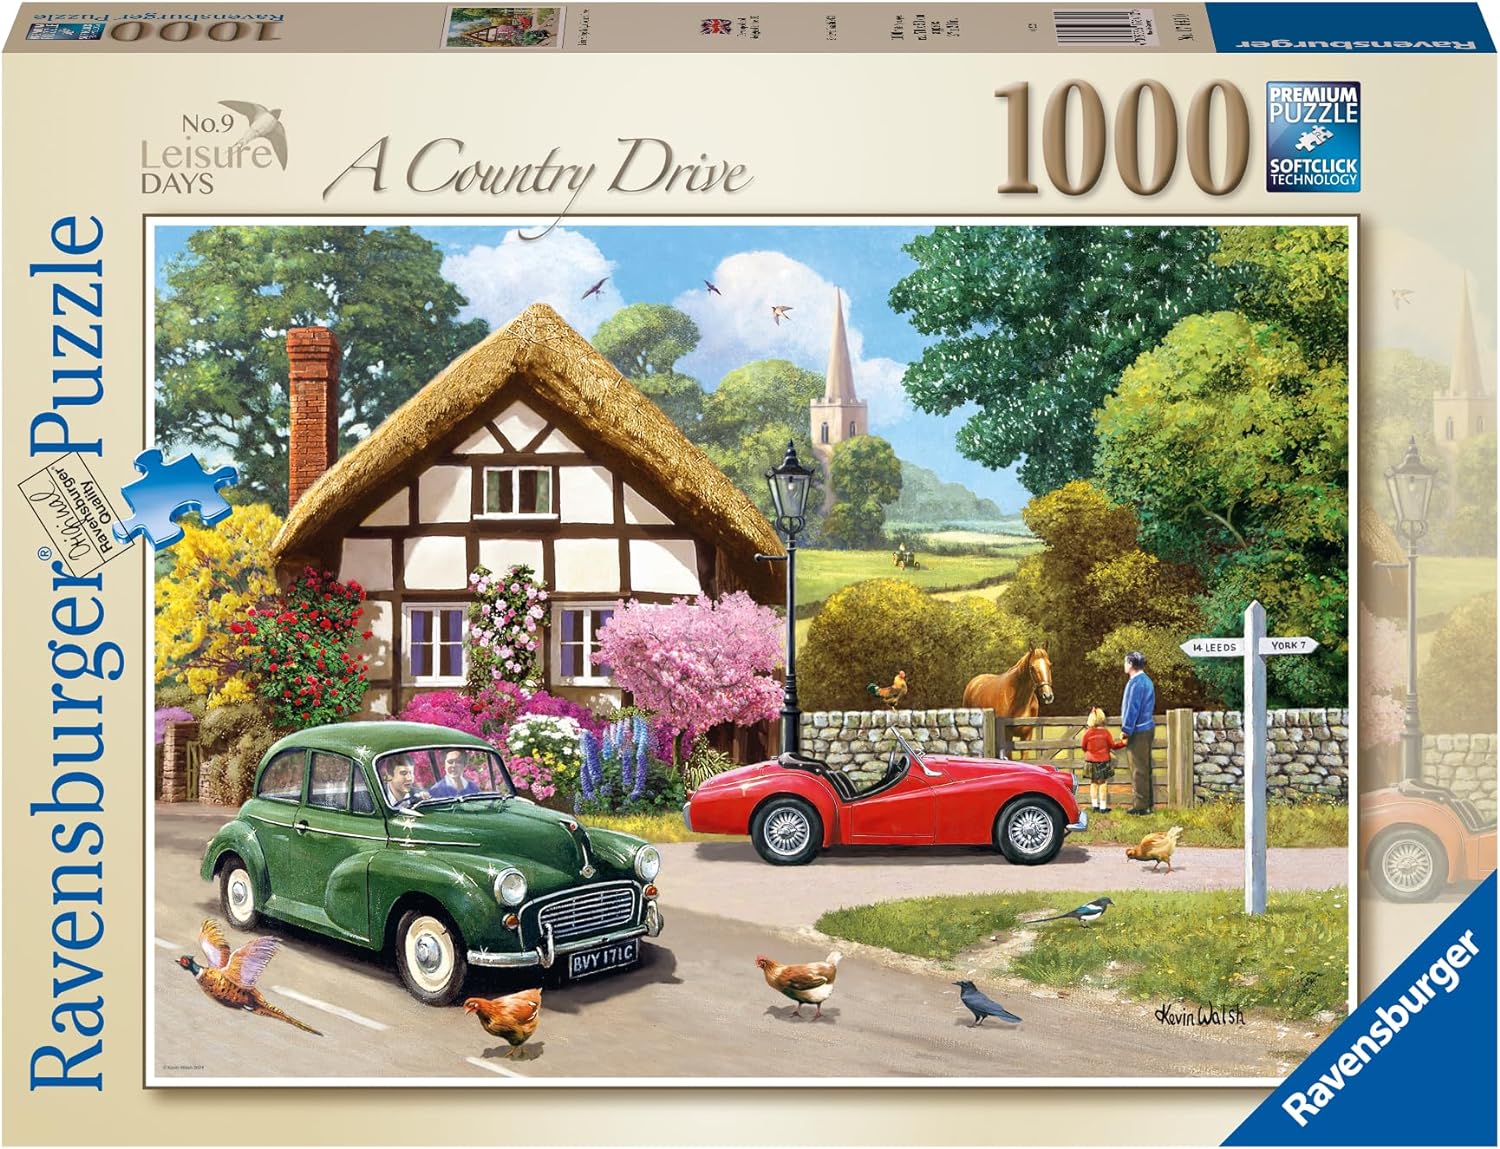 Ravensburger 1000 Piece Jigsaw Puzzle - Leisure Days - A Country Drive - Triumph and Morris - 176410